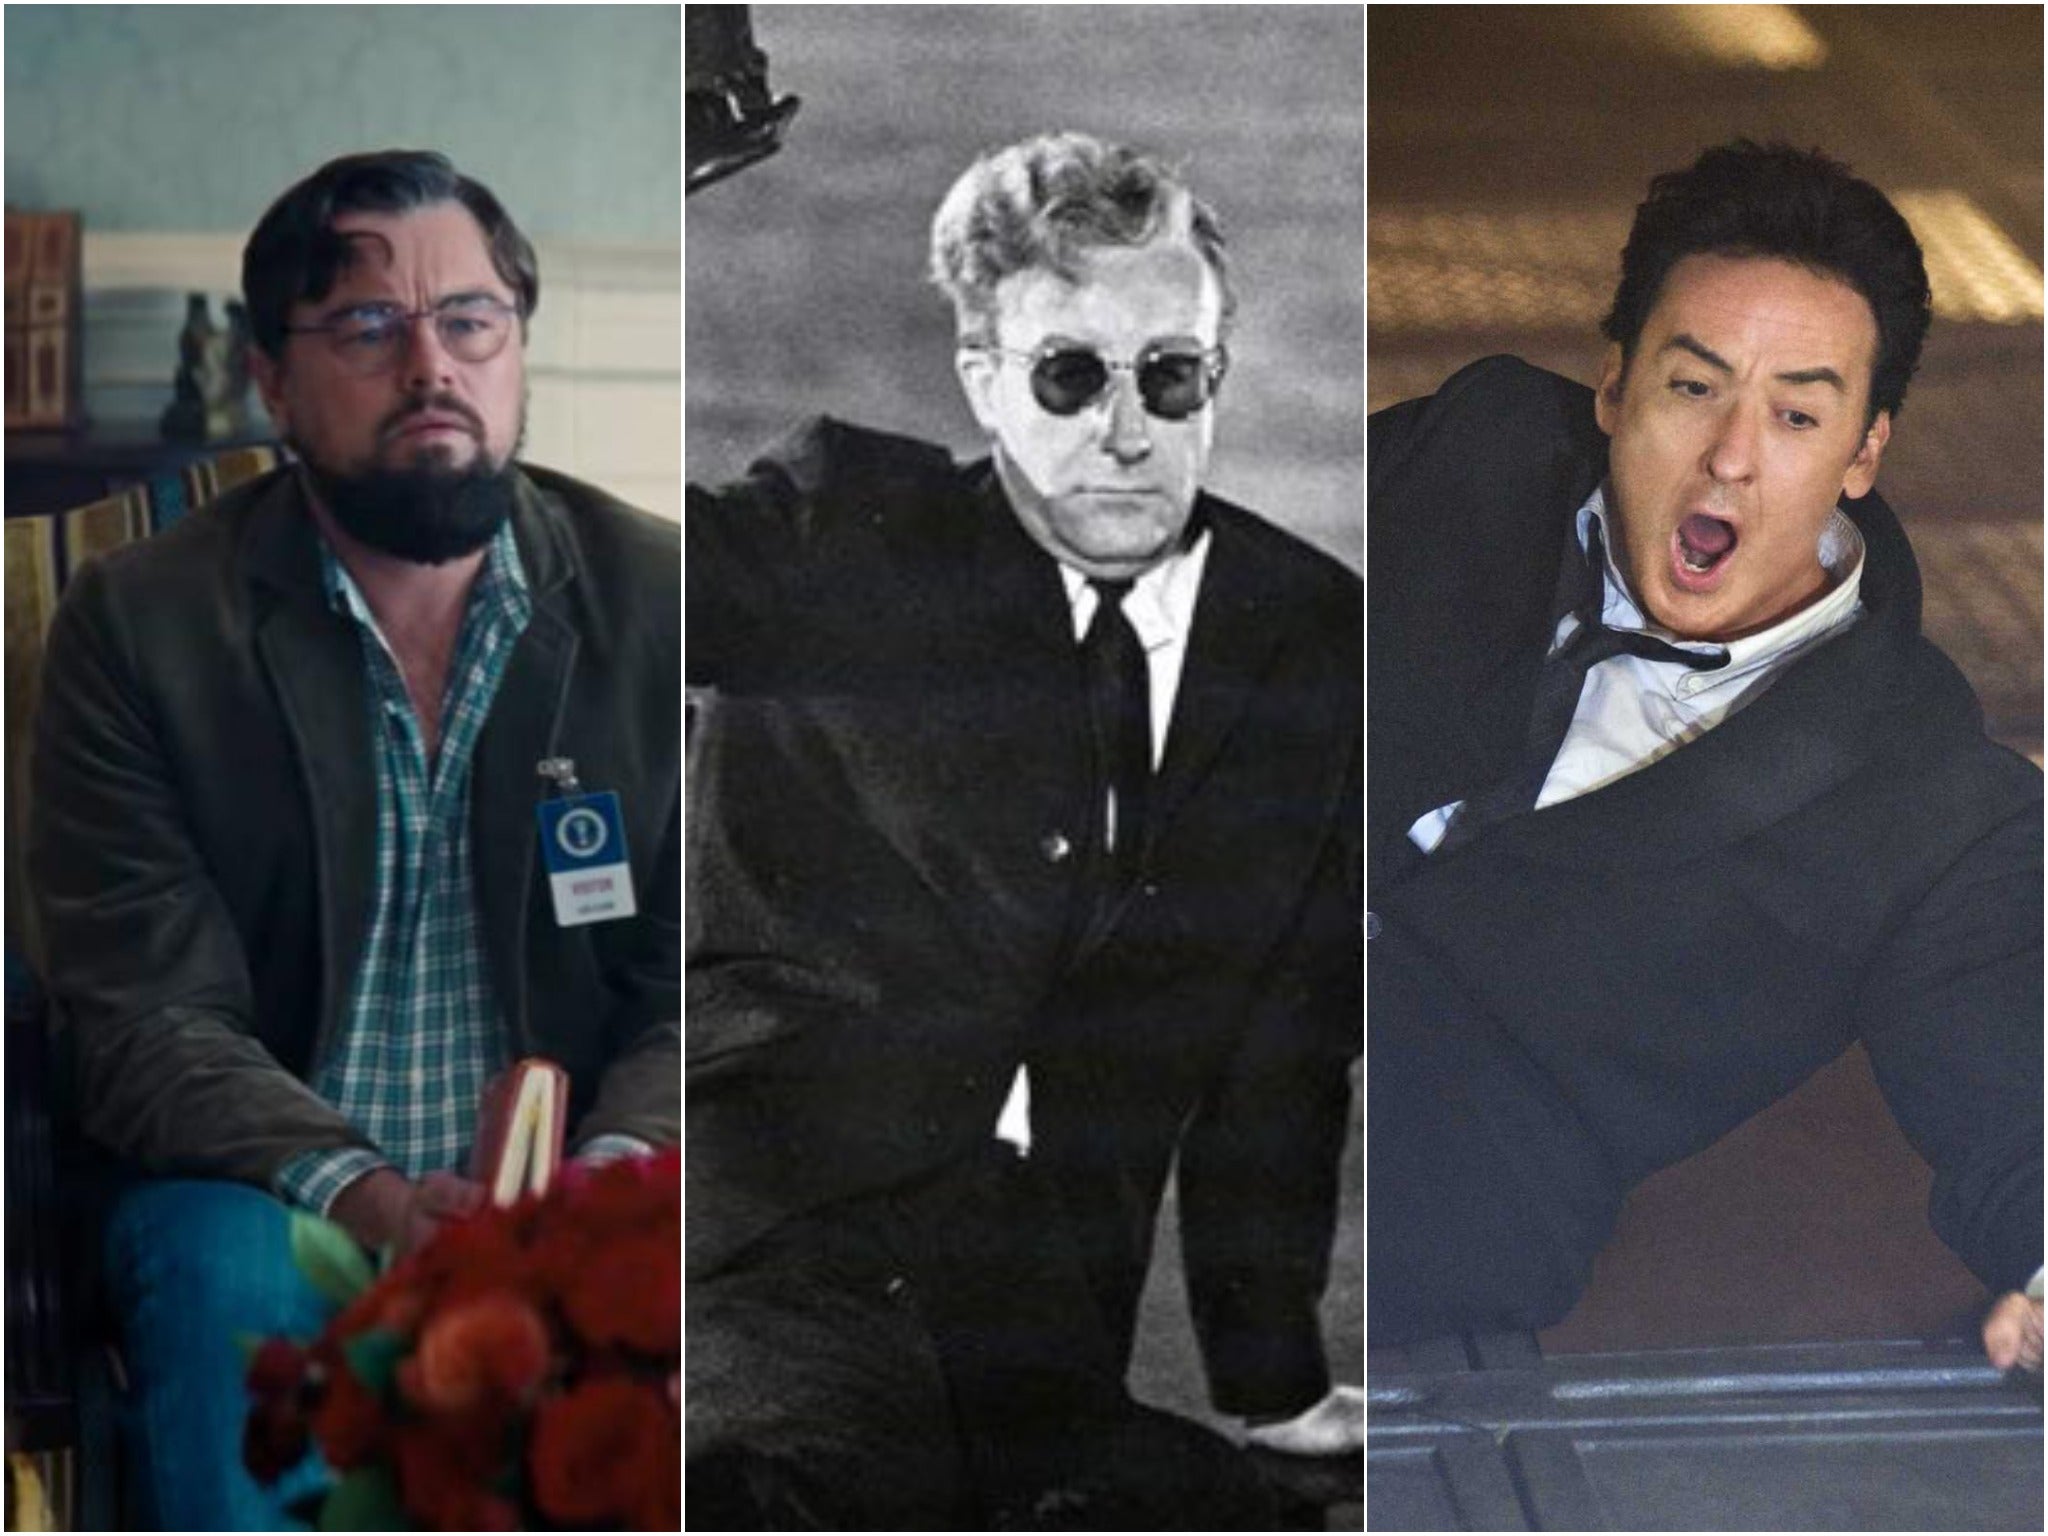 Eve of destruction: Leonardo DiCaprio in ‘Don’t Look Up’, Peter Sellers in ‘Dr Strangelove’ and John Cusack in ‘2012’